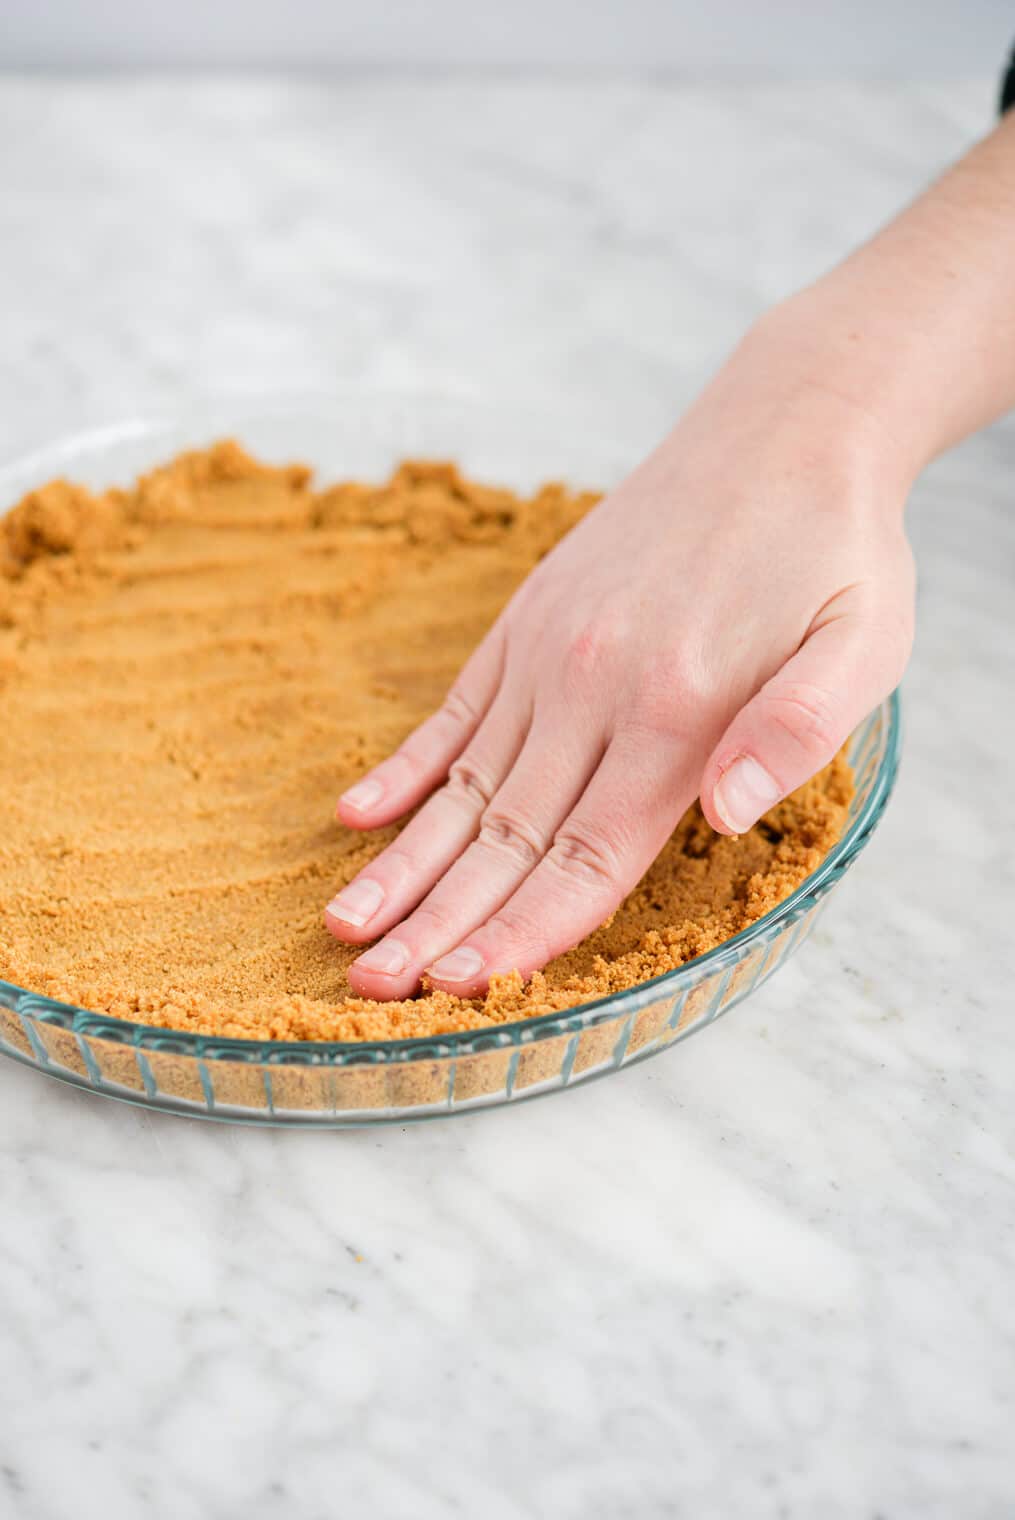 graham cracker crust crumbles being pressed into a clear glass pie plate